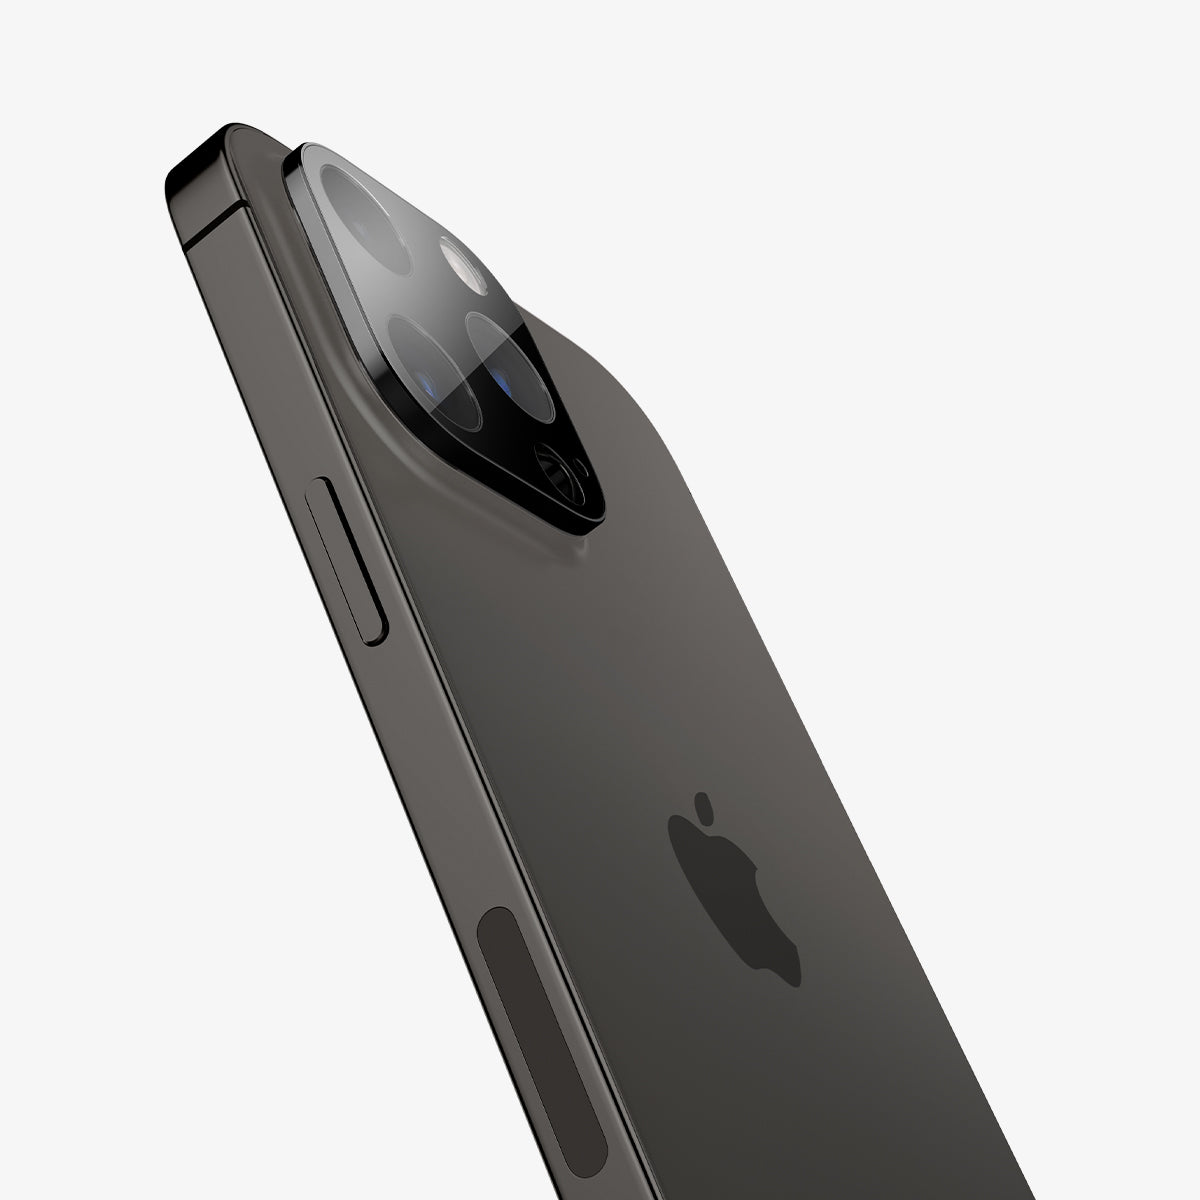 AGL06913 - iPhone 14 Pro / 14 Pro Max Optik Lens Protector in black showing the back, side and zoomed in on camera lens